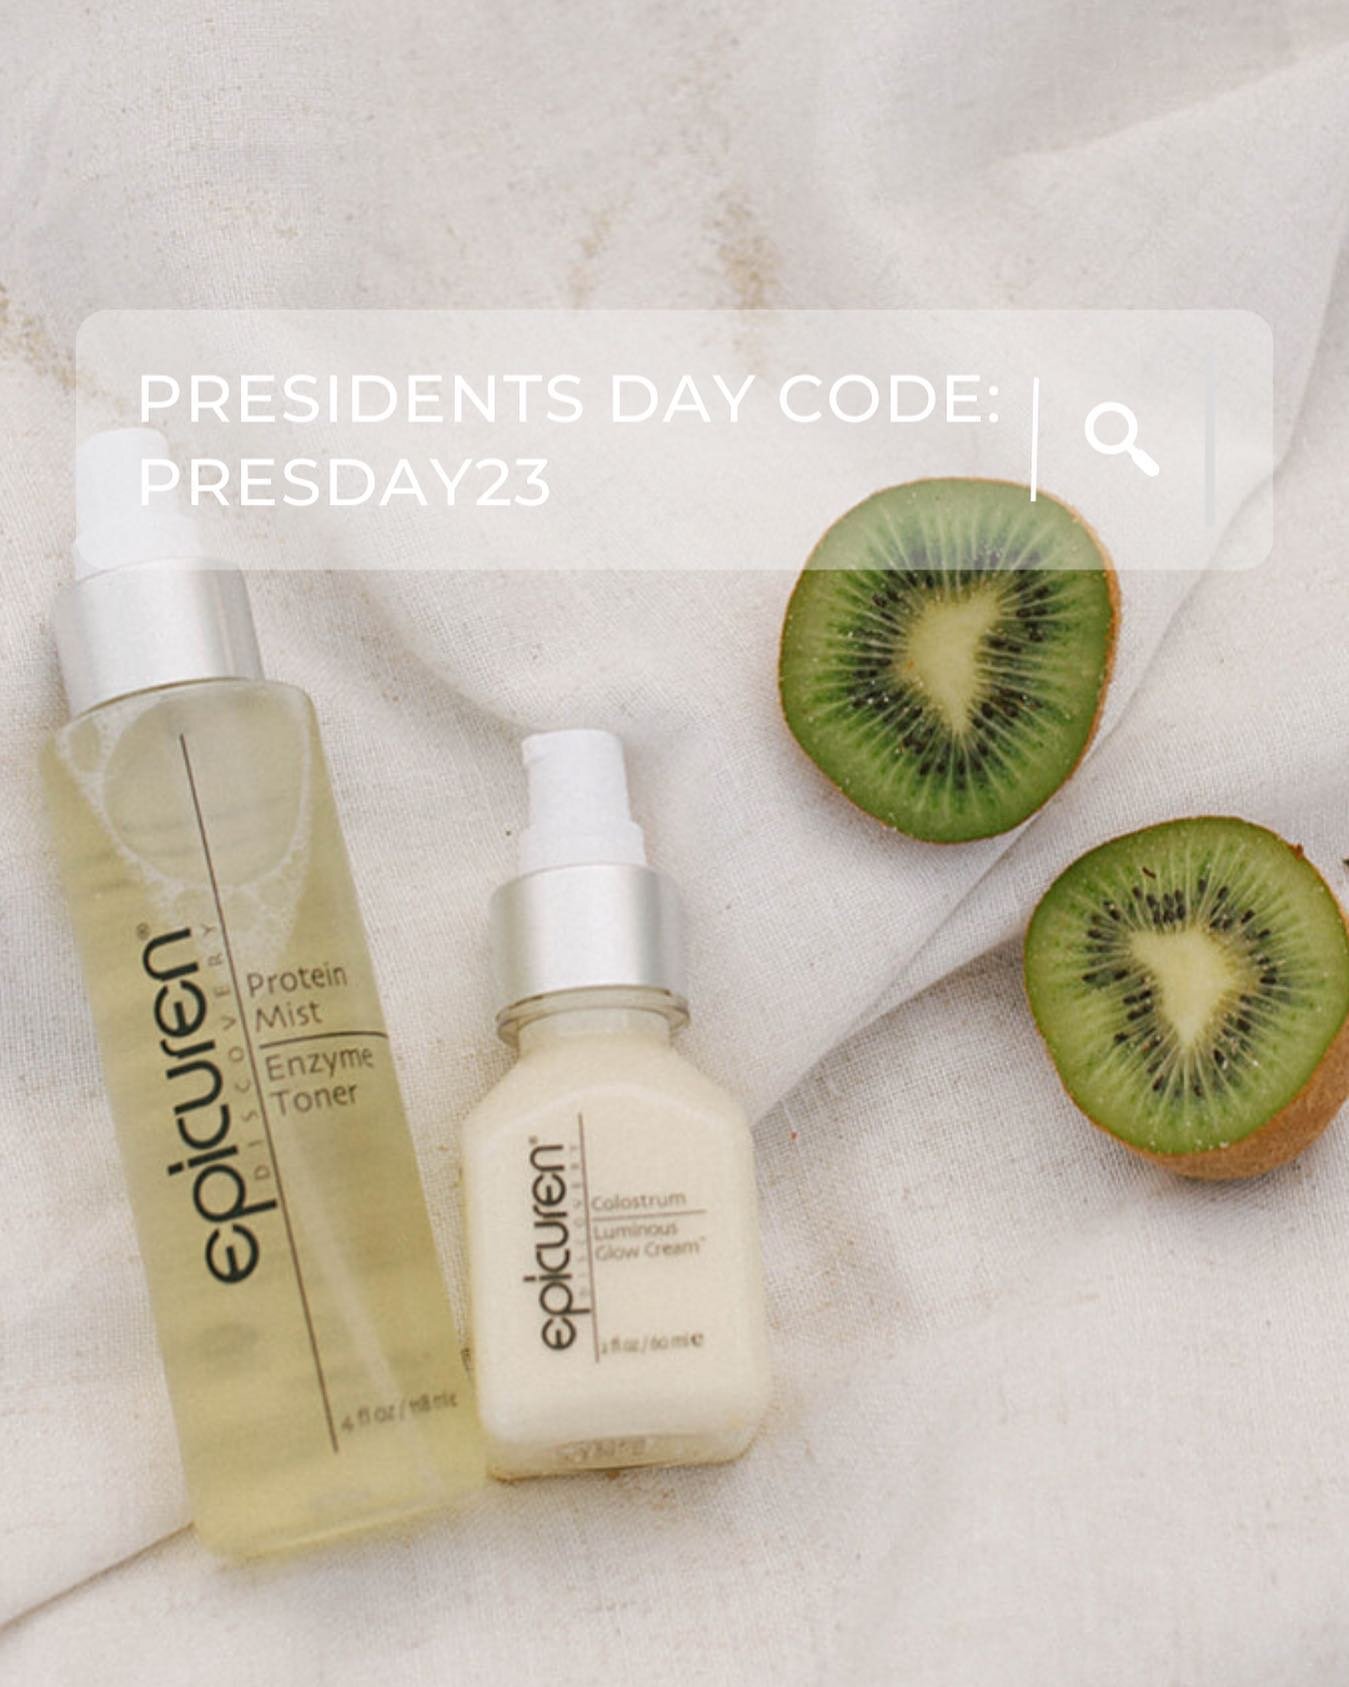 20% off of all Skincare! 

Code: PRESDAY23 for online or in studio purchases until 2/21. 

Click the link for the HUT SHOP in our profile. 

#theskinhut #skincare #safeskincare #presidentsday #skincaresale #kailua #kailuabeach #kailuaspa #hawaiispa #